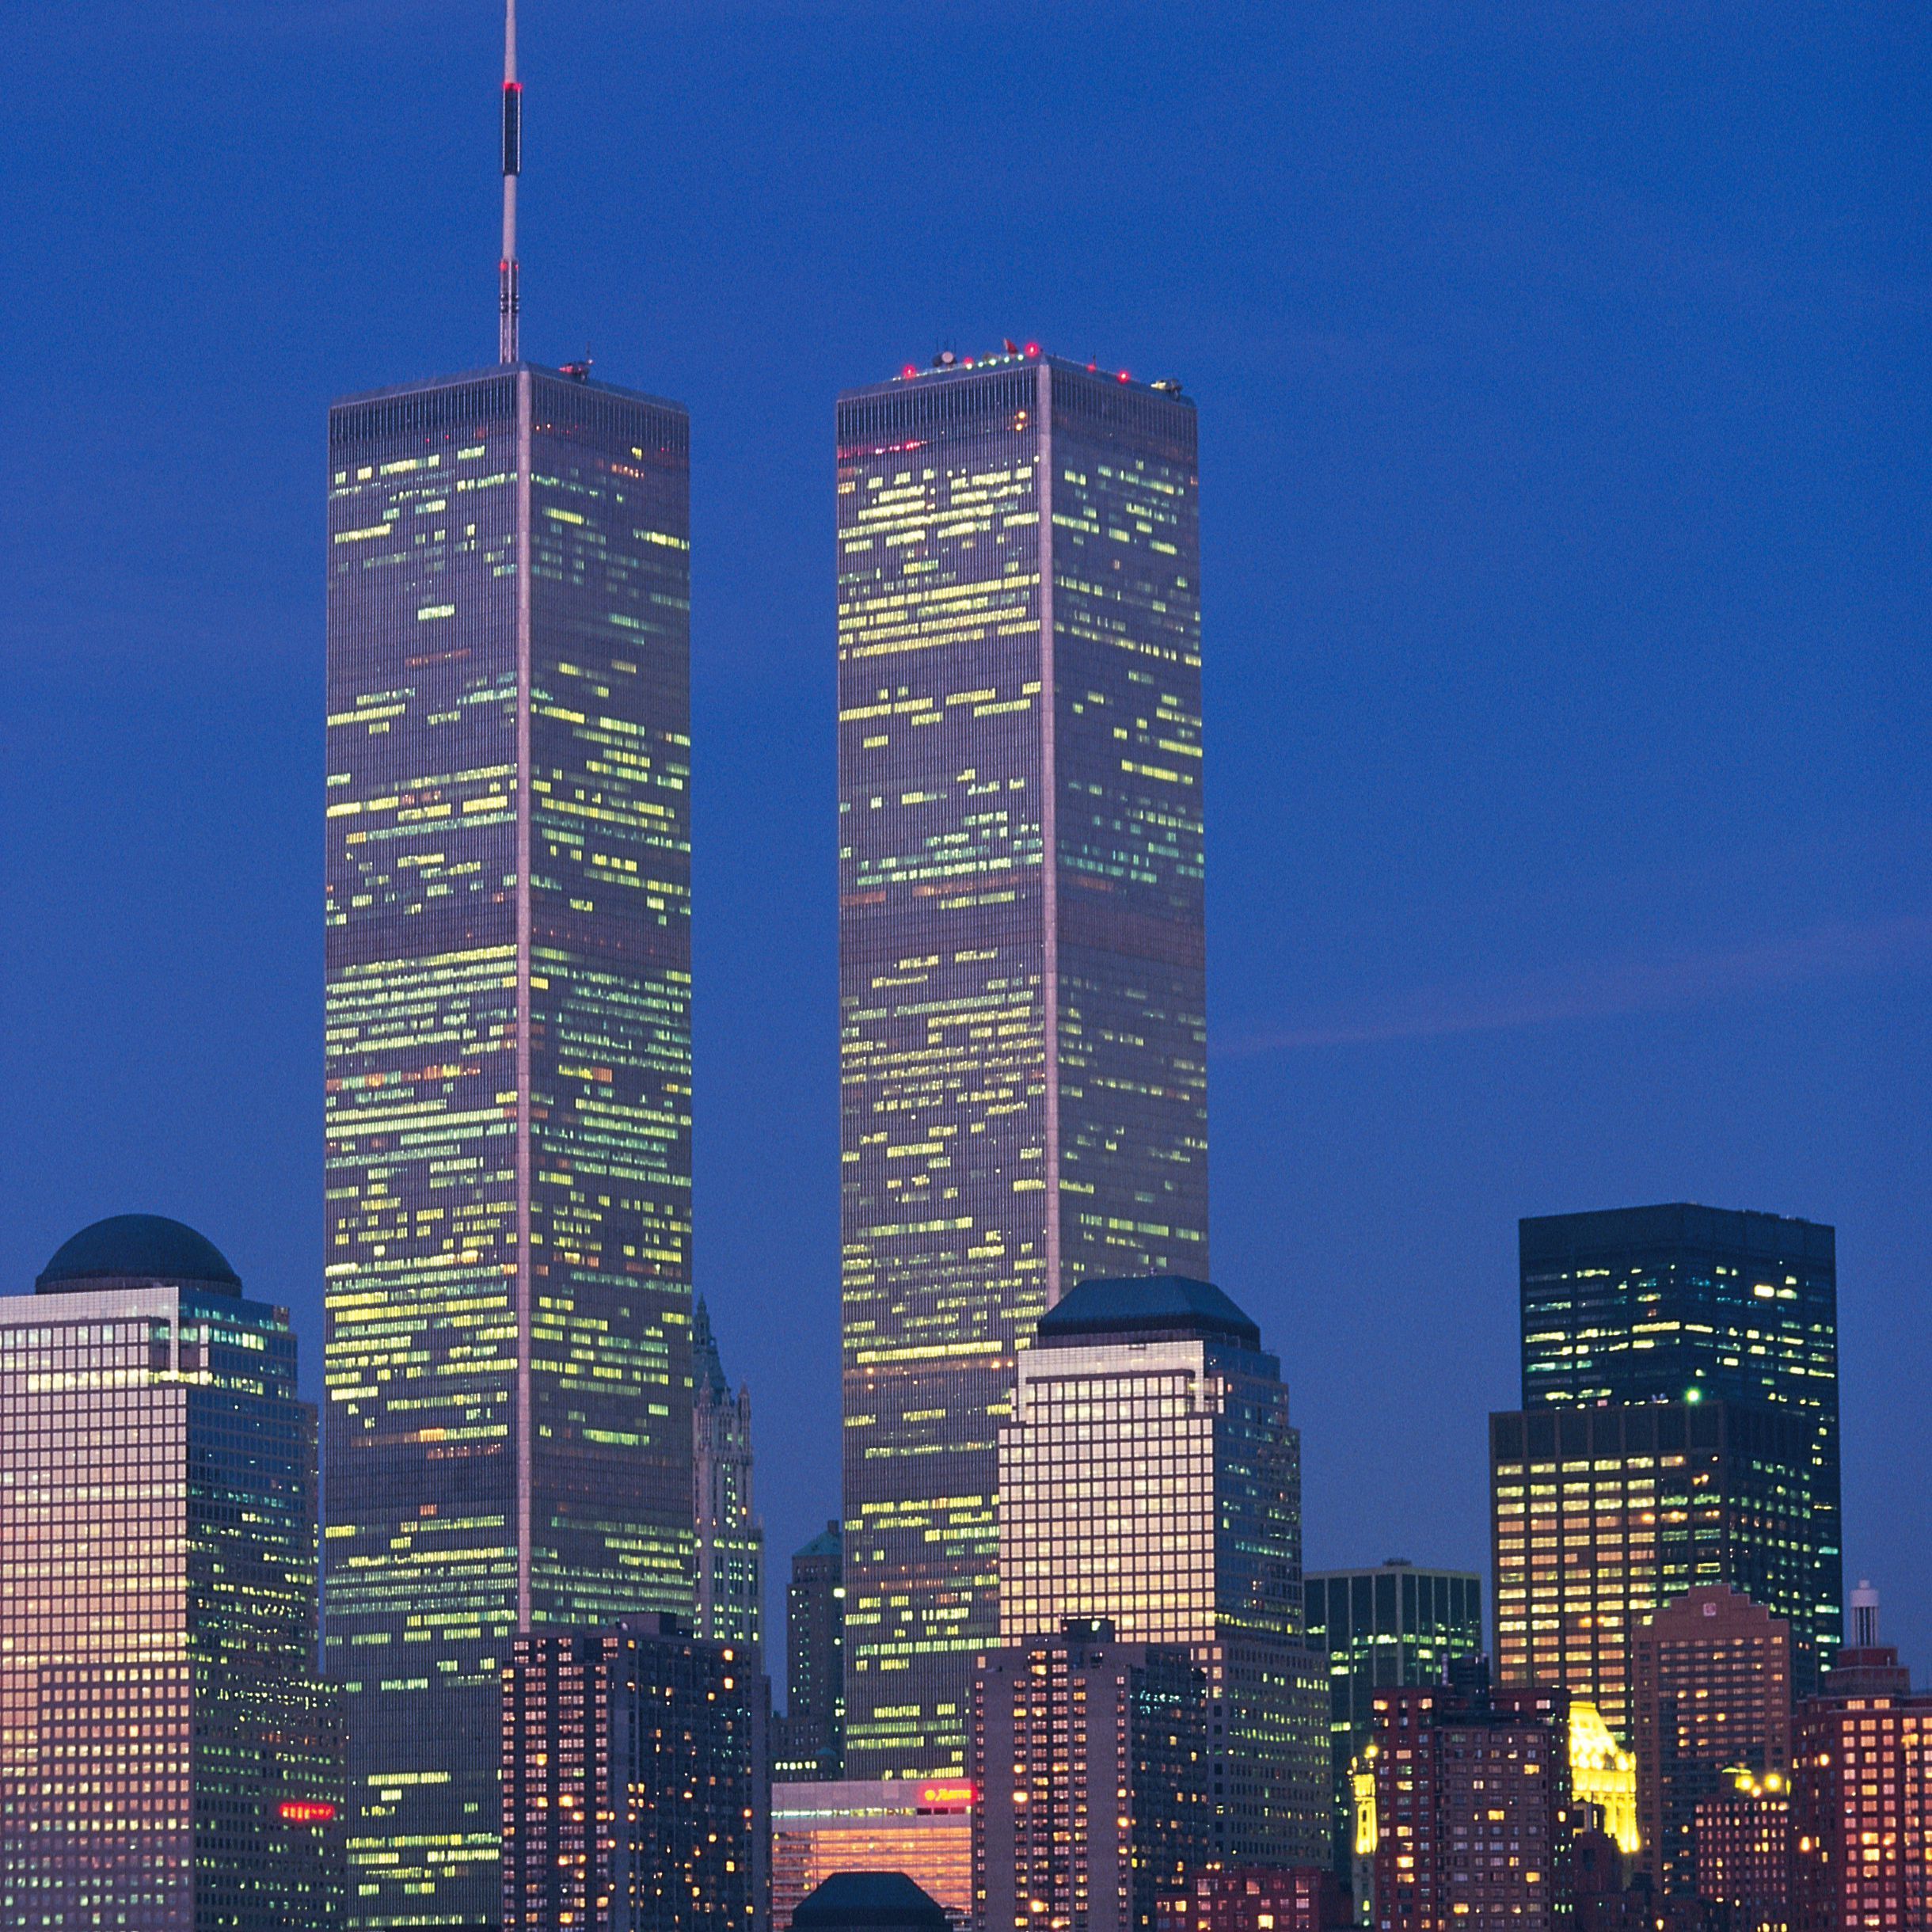 image Of The World Trade Center, 1970 2001